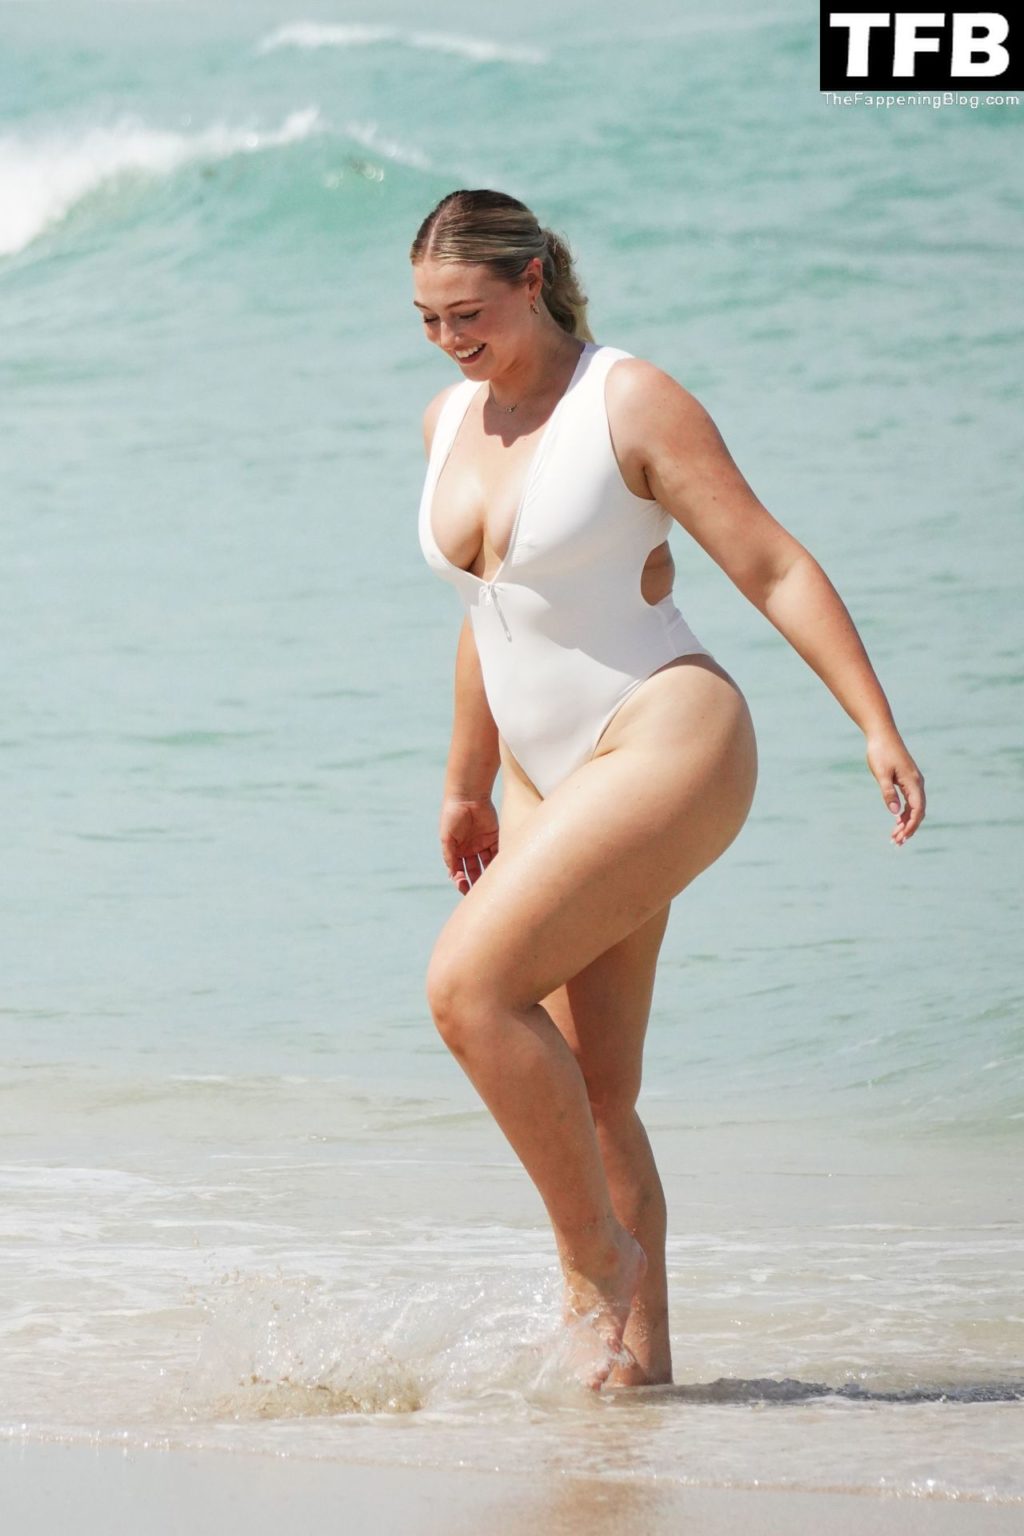 Iskra Lawrence Sexy The Fappening Blog 5 1024x1536 - Iskra Lawrence Displays Her Curves on the Beach in Miami (21 Photos)